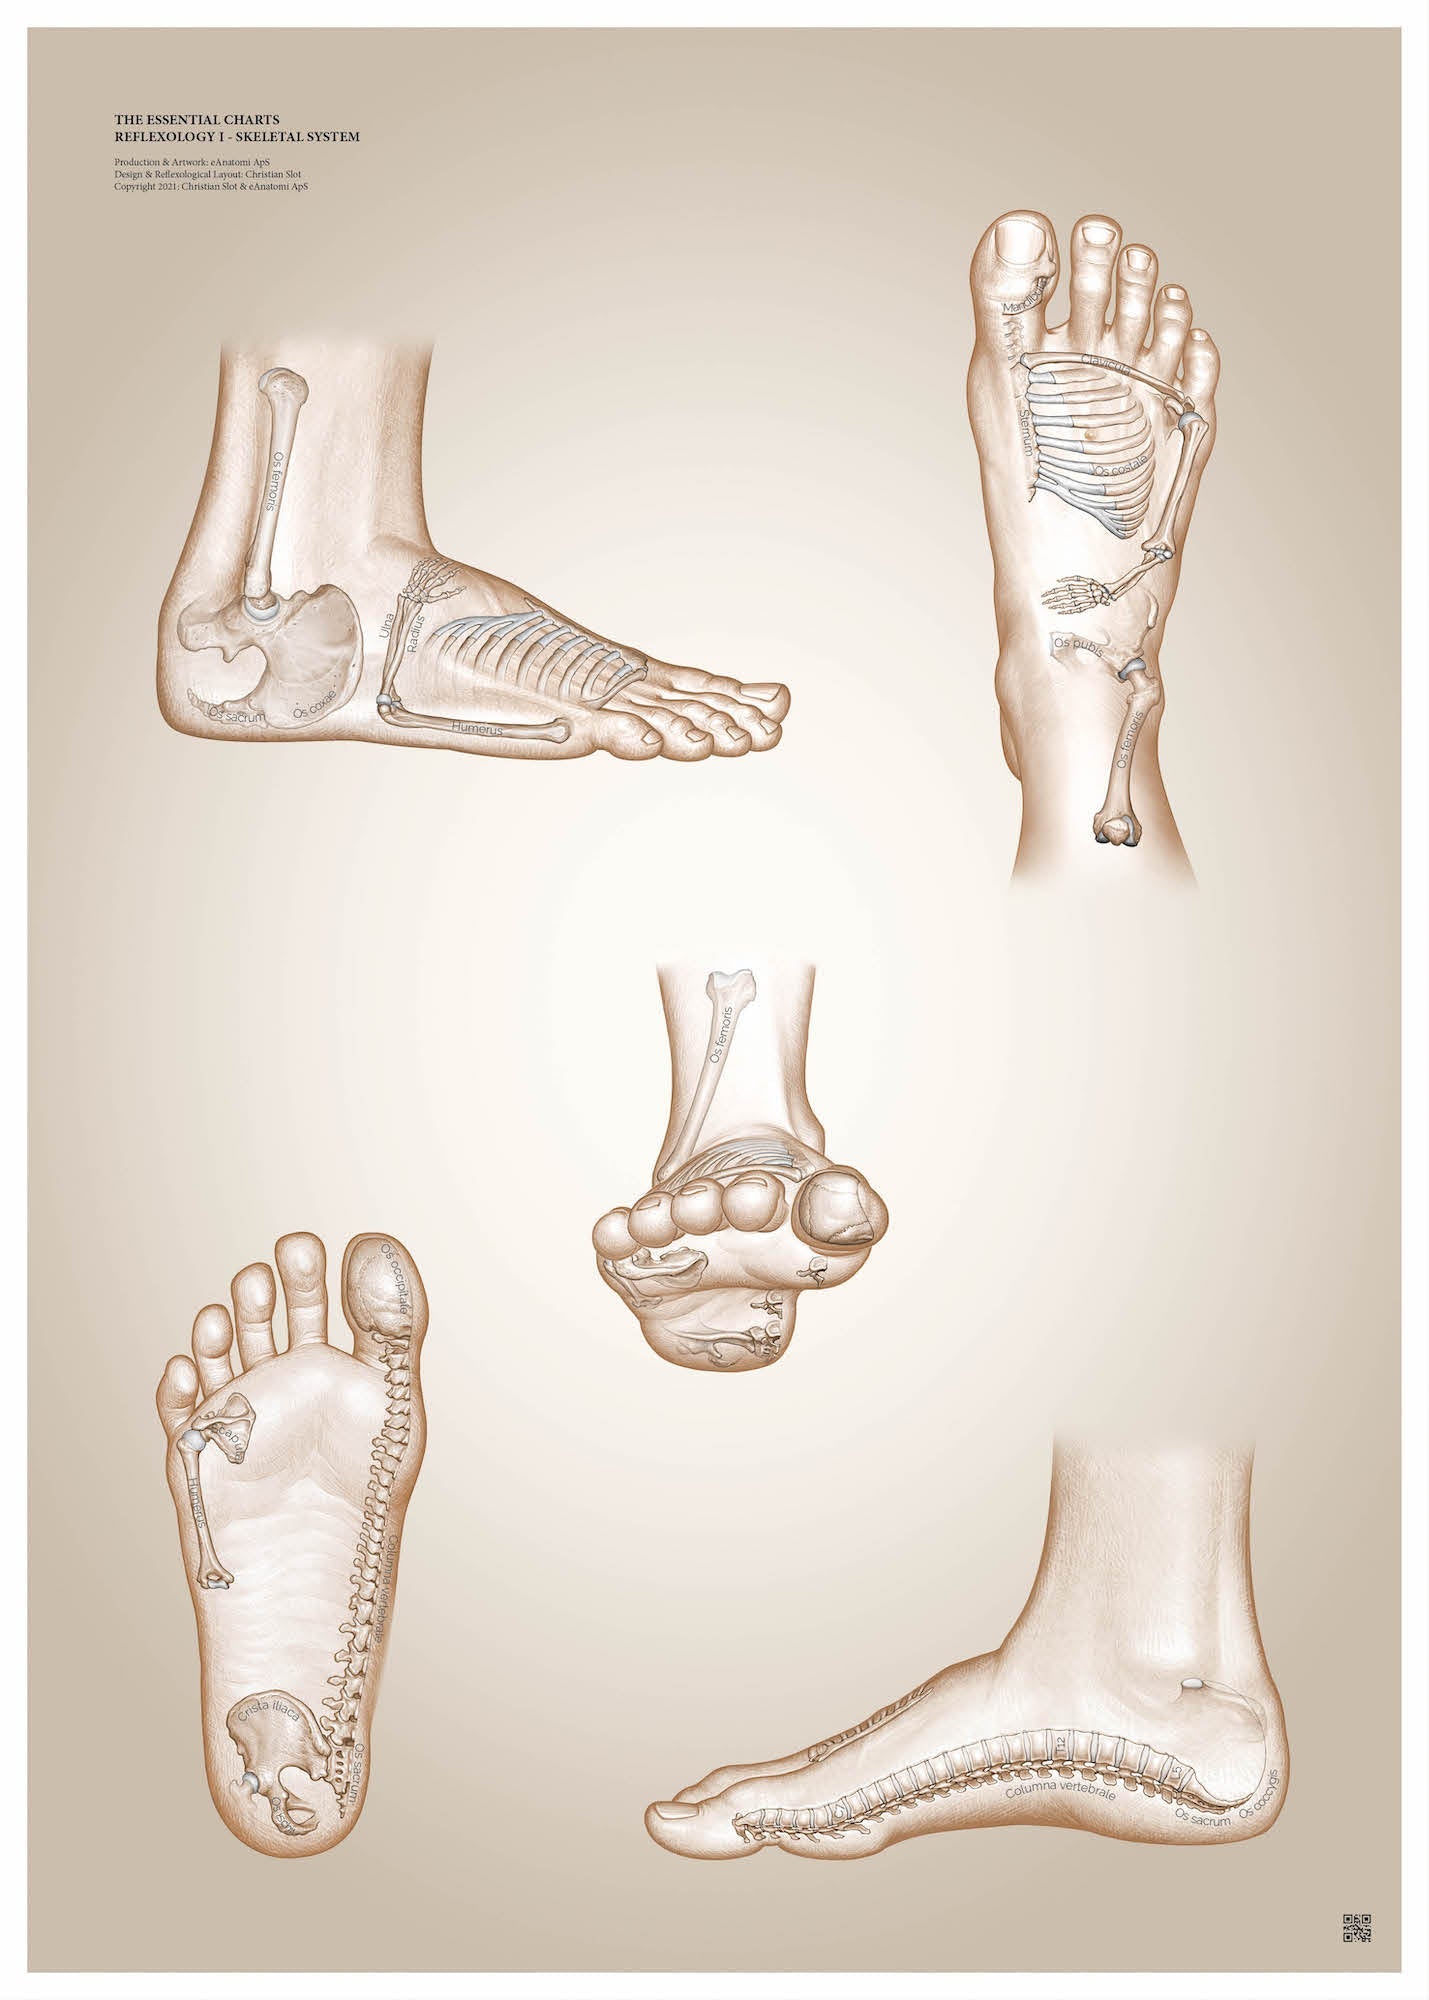 Poster about muscular reflexology - The skeletal system by Christian Slot